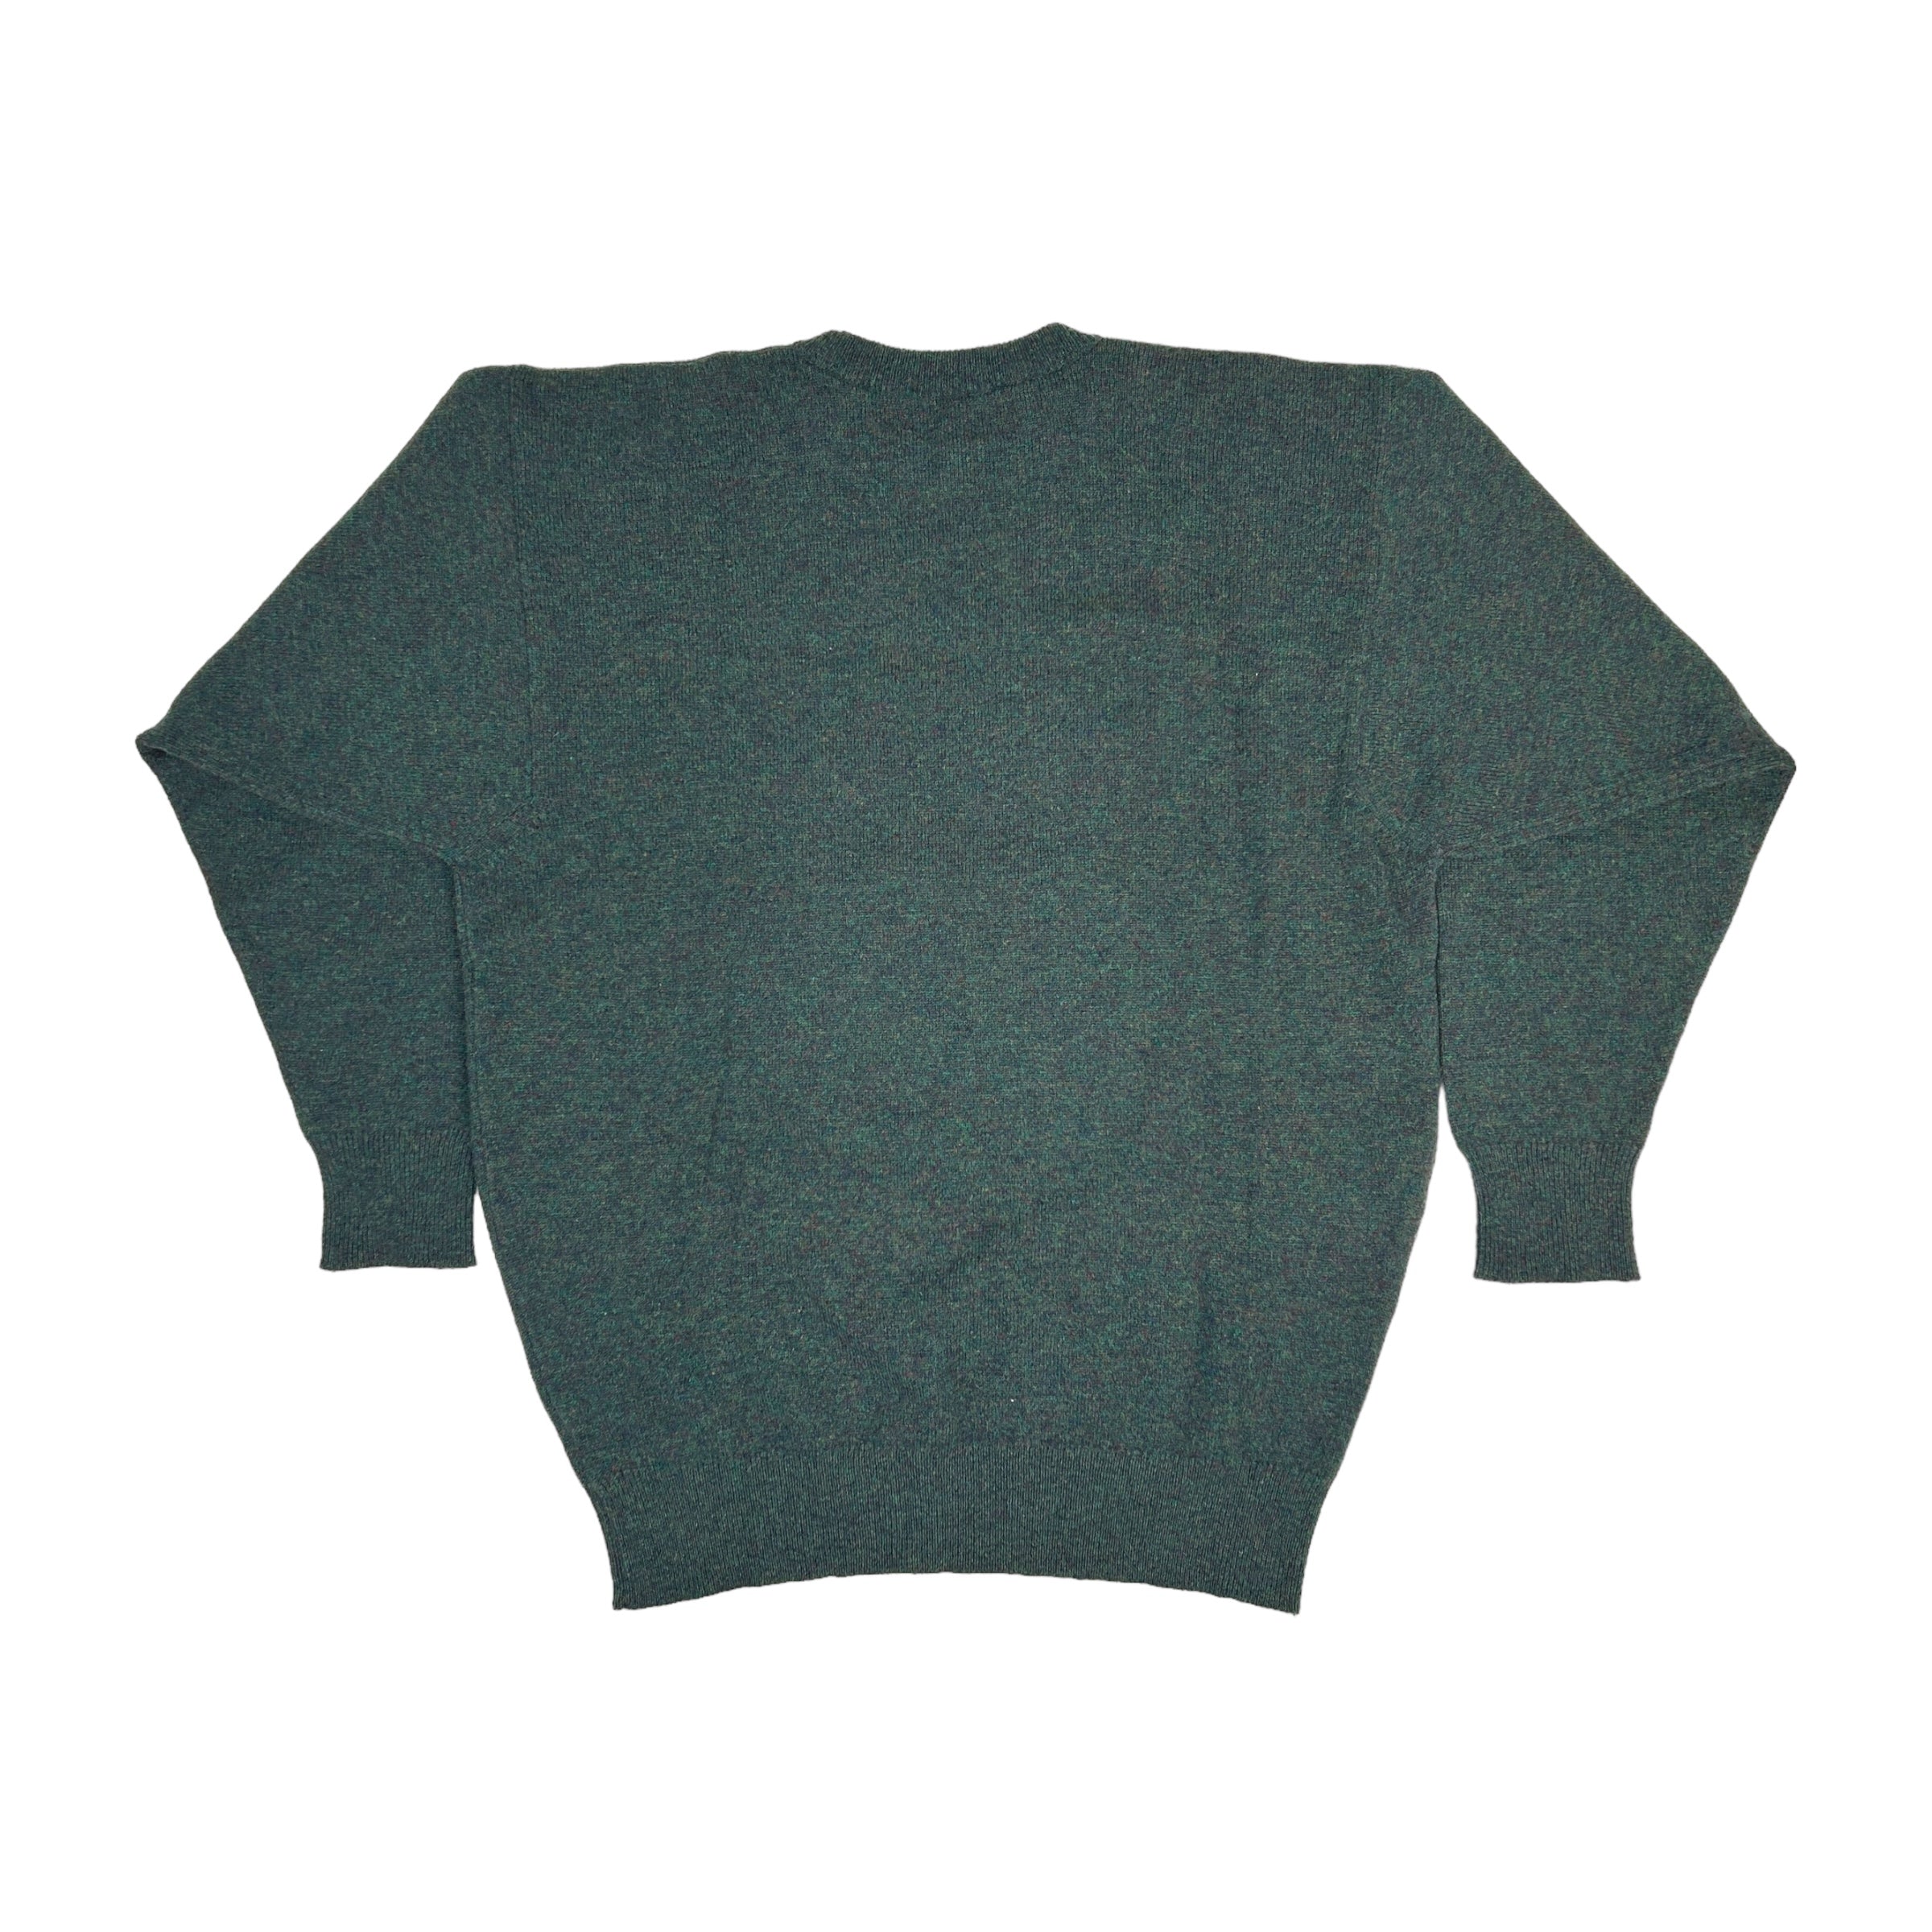 BURBERRY VINTAGE LAMBSWOOL KNIT SWEATER